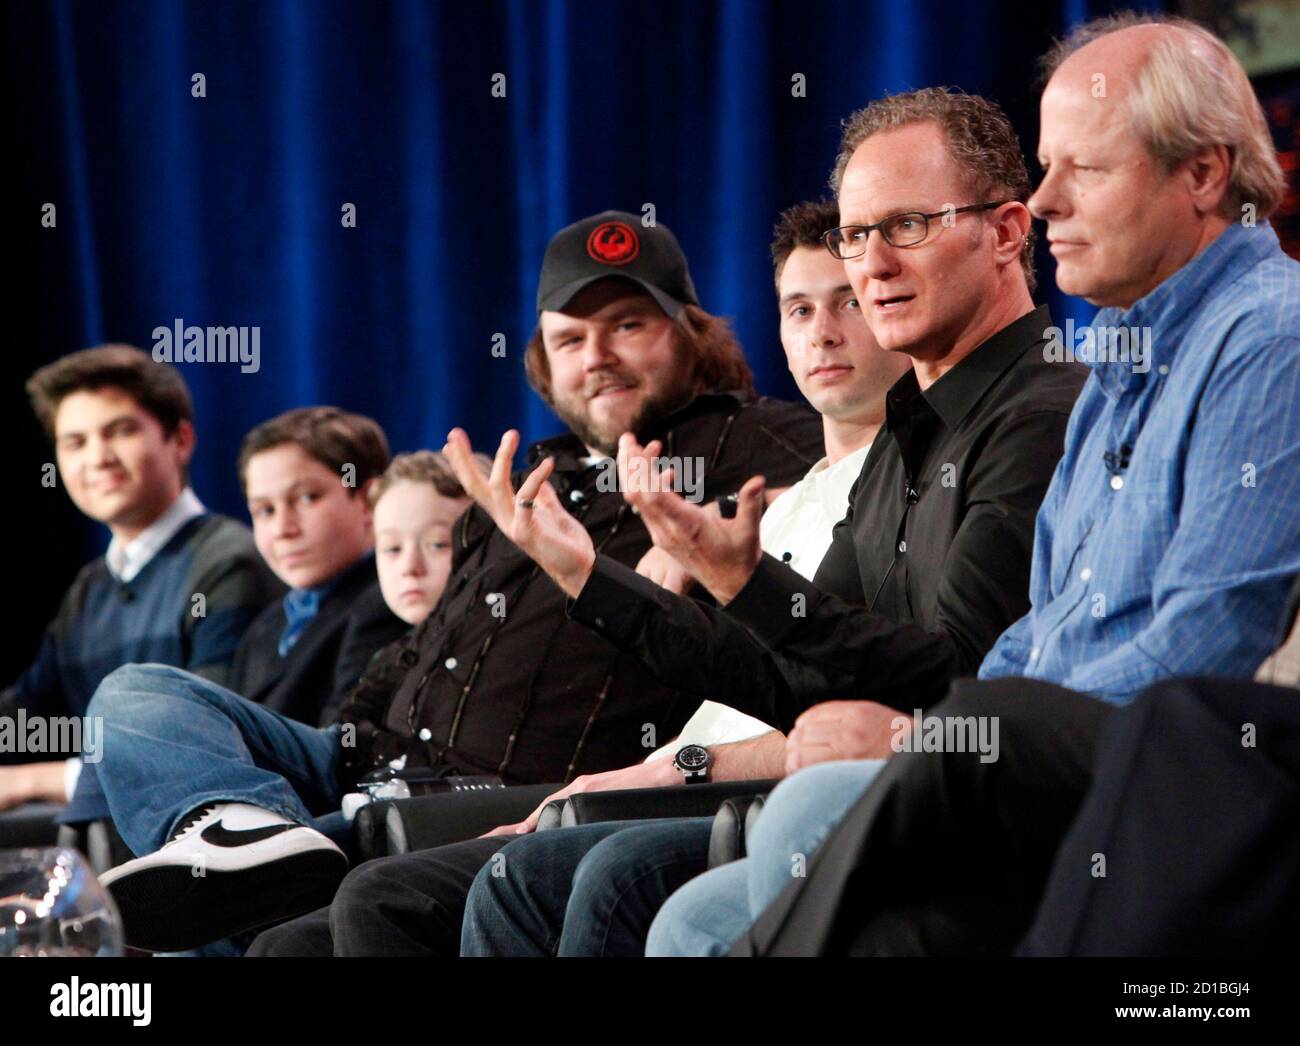 Executive producer Todd Holland (2nd R) of the series 'Sons of Tucson' speaks as cast members (L-R) Matthew Levy, Frank Dolce, Benjamin Stockham, Tyler Labine, executive producer Justin Berfield, and executive producer Matthew Carlson (far R) look on while they participate in a panel discussion at the Fox Broadcasting Company Winter 2010 Television Critics Association press tour in Pasadena, January 11, 2010. REUTERS/Danny Moloshok (UNITED STATES - Tags: ENTERTAINMENT) Stock Photo